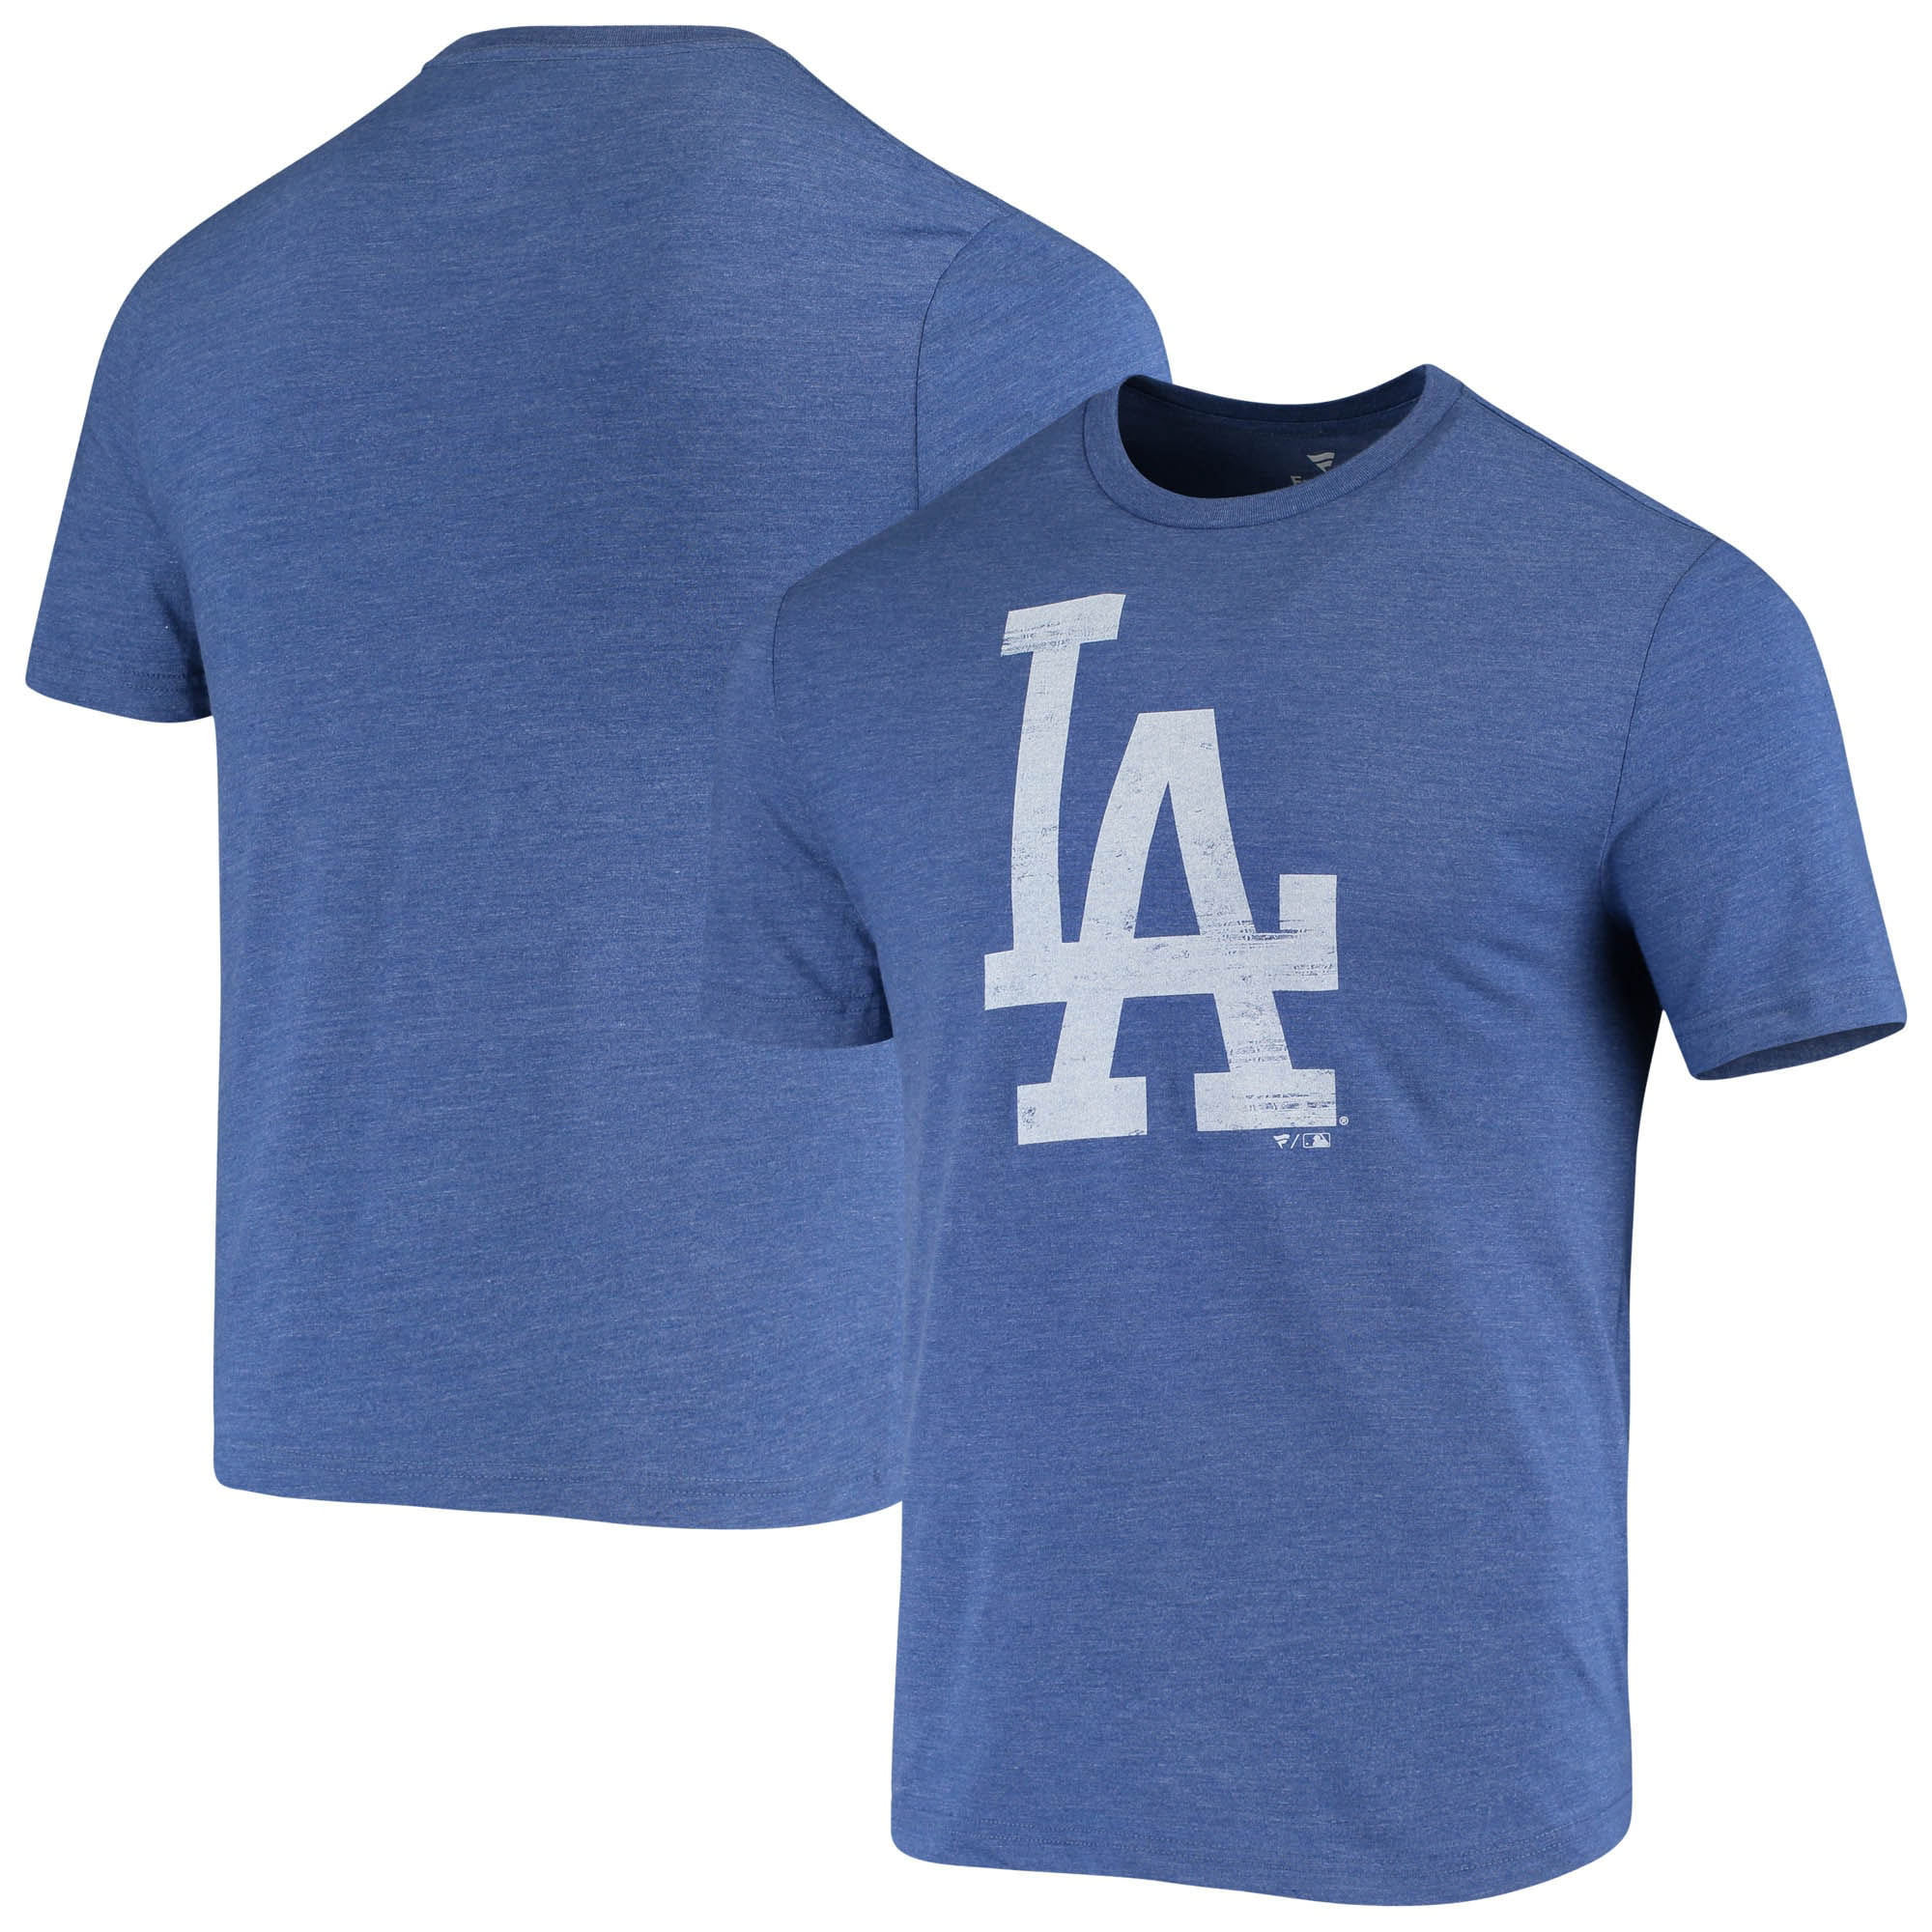 Men's Fanatics Branded Royal Los Angeles Dodgers Weathered